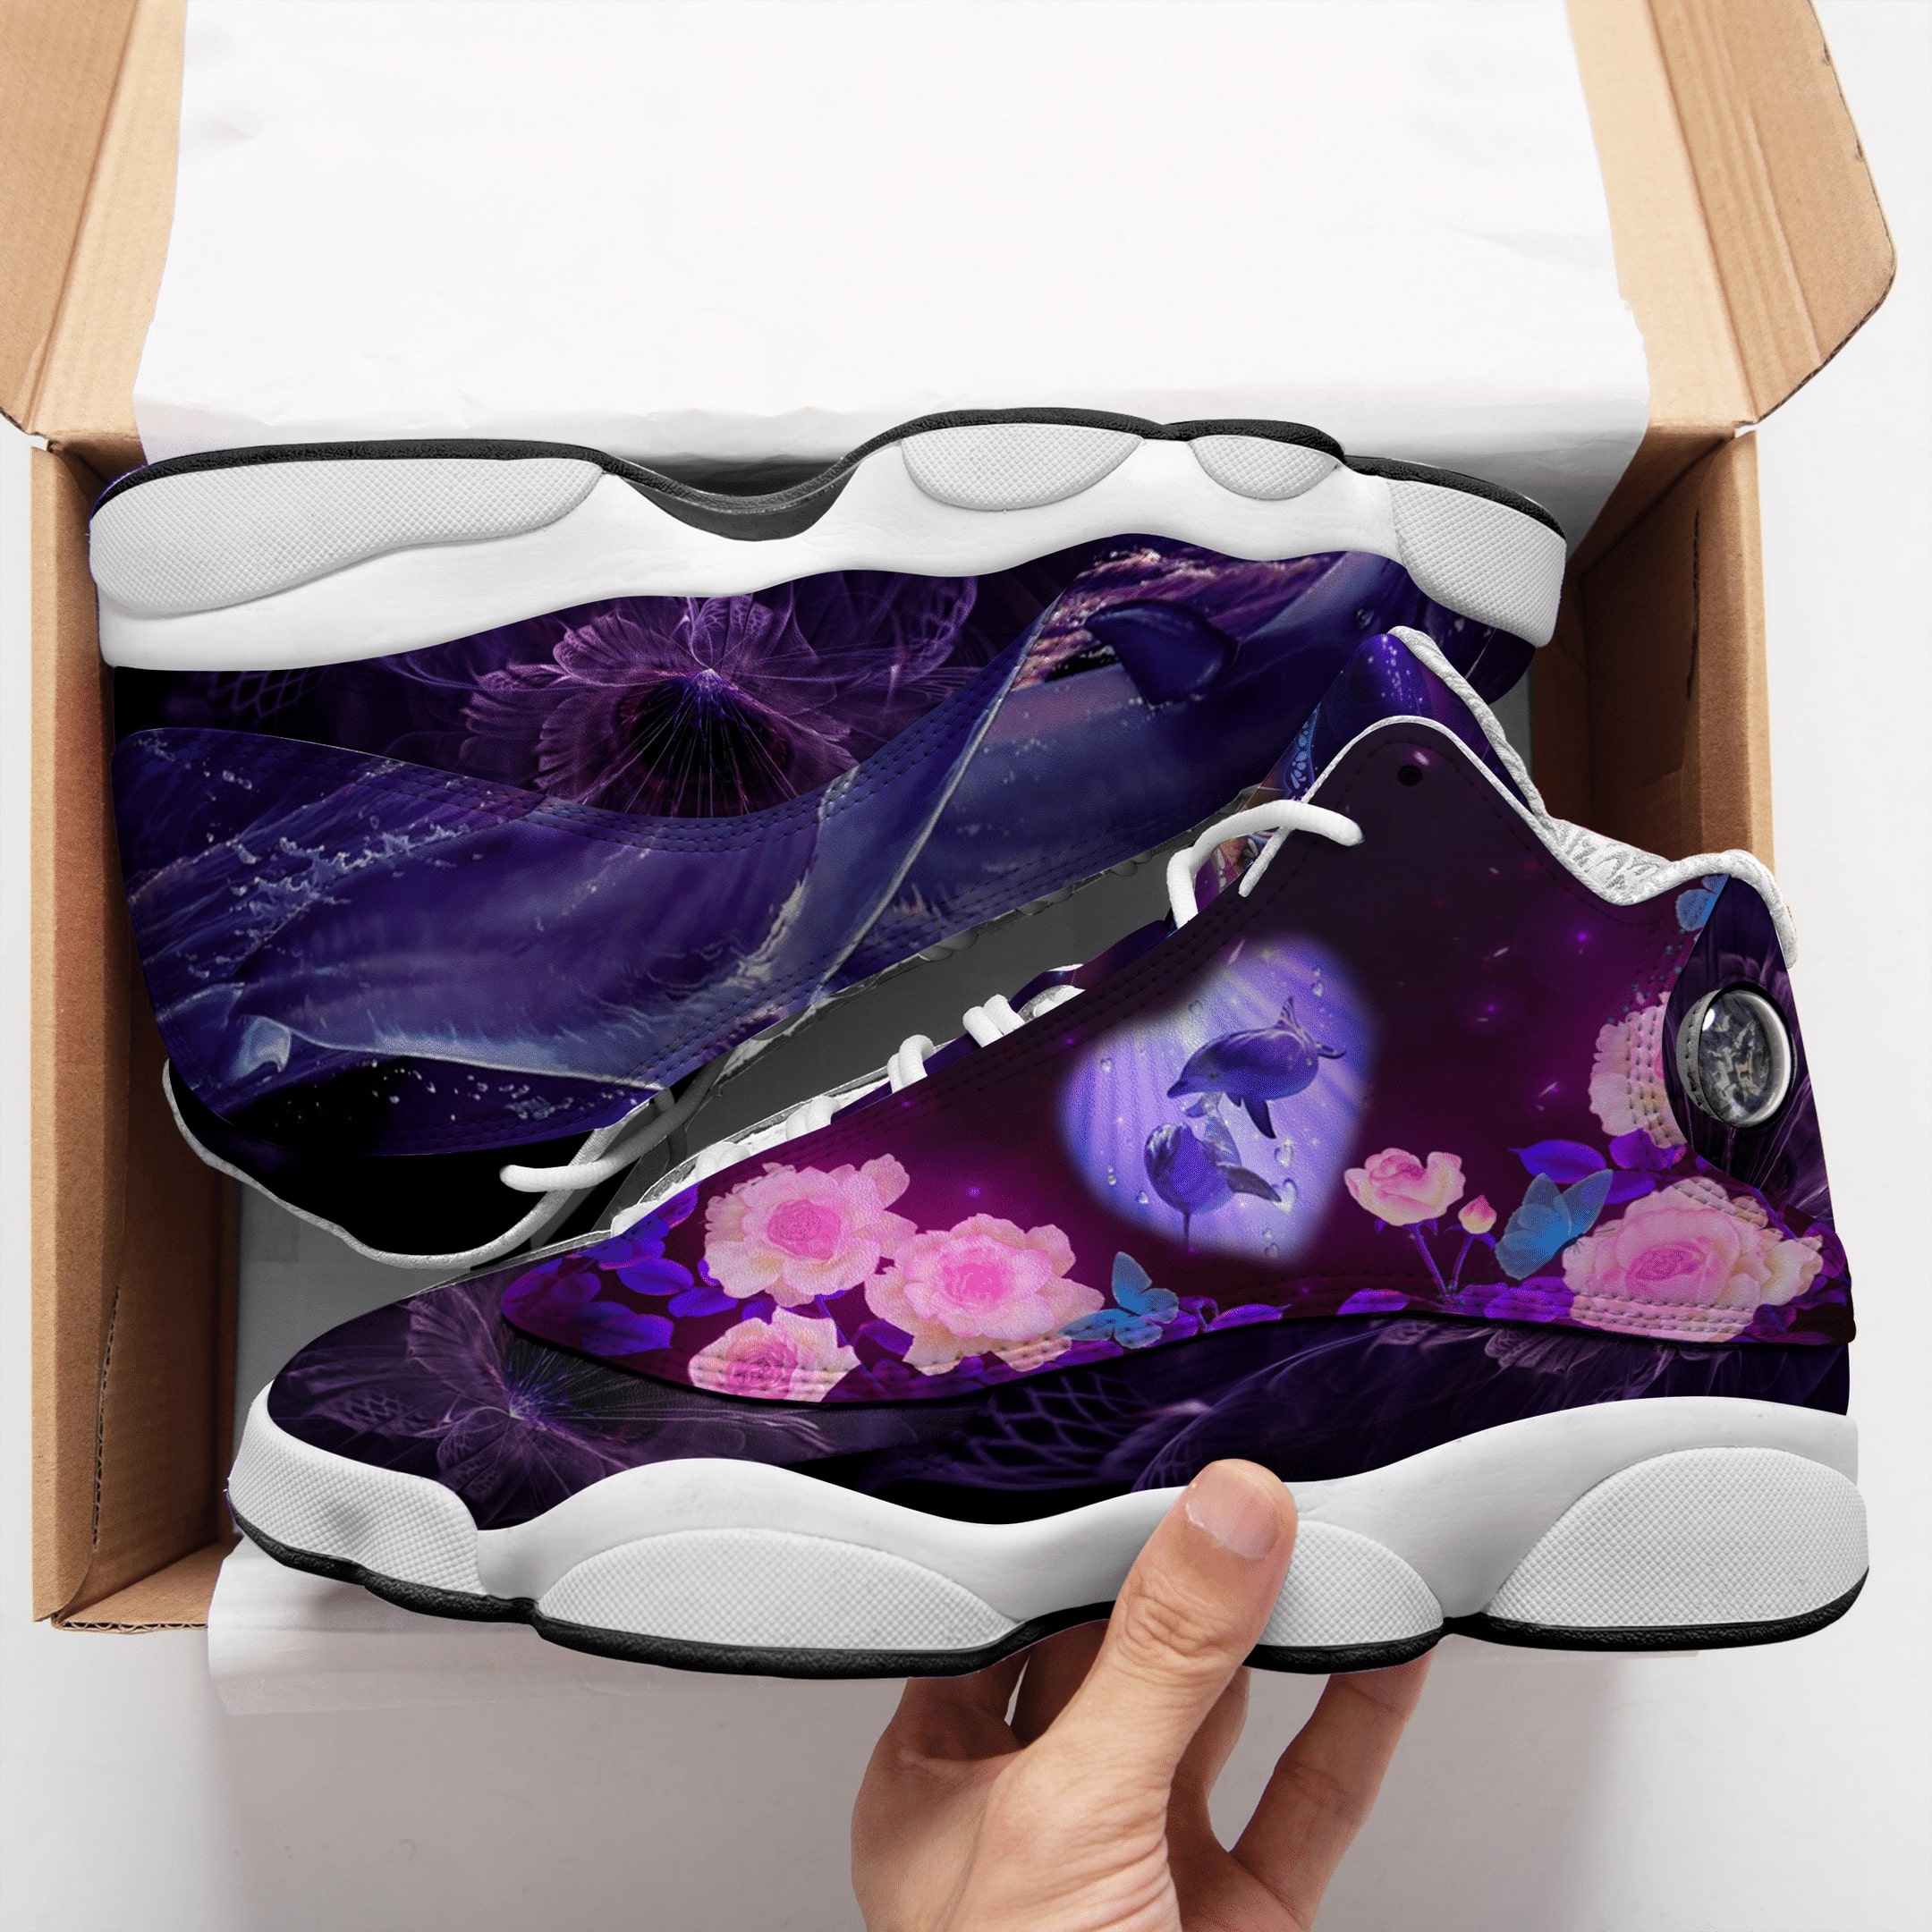 floral dolphin all over printed air jordan 13 sneakers 3